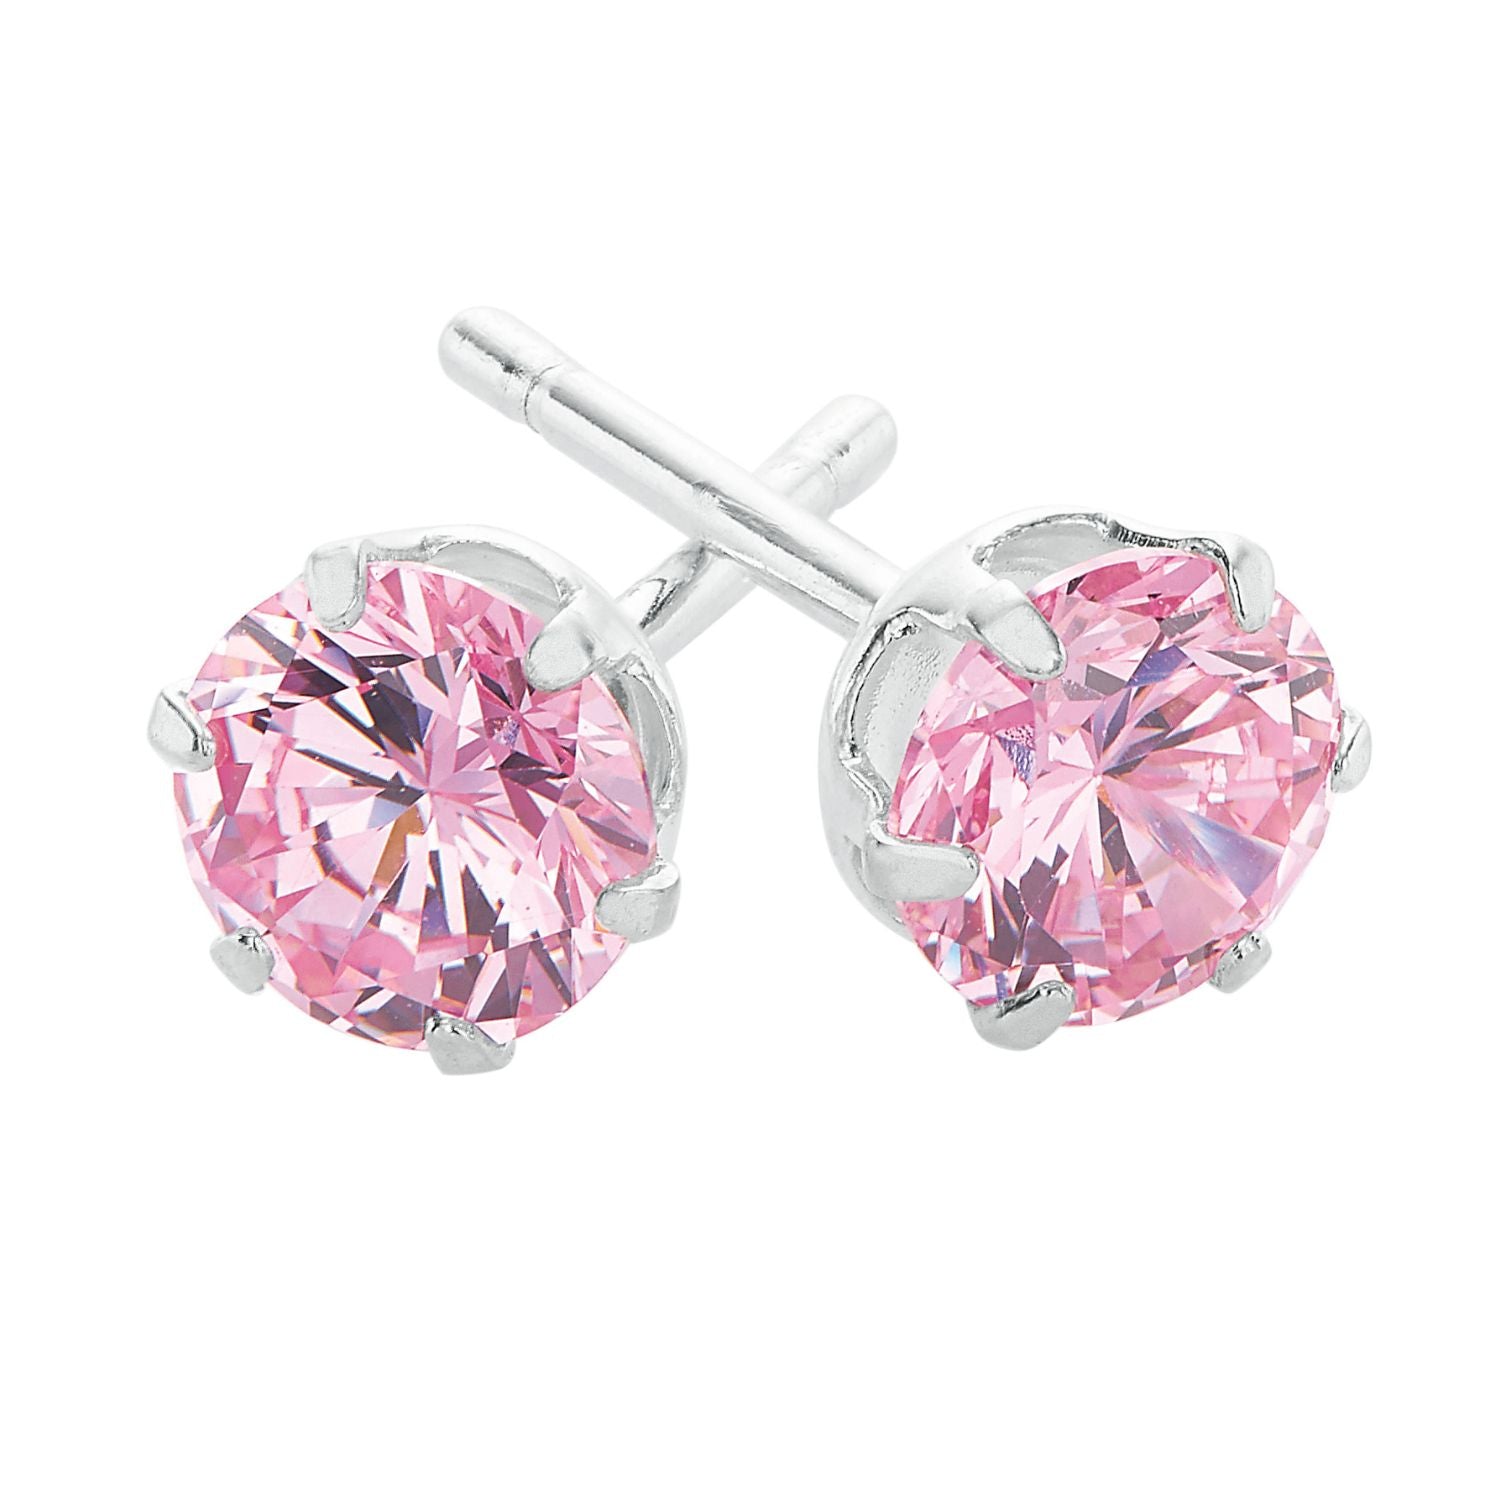 Sterling Silver with 5mm Pink Cubic Zirconia Stud Earrings – Zamels